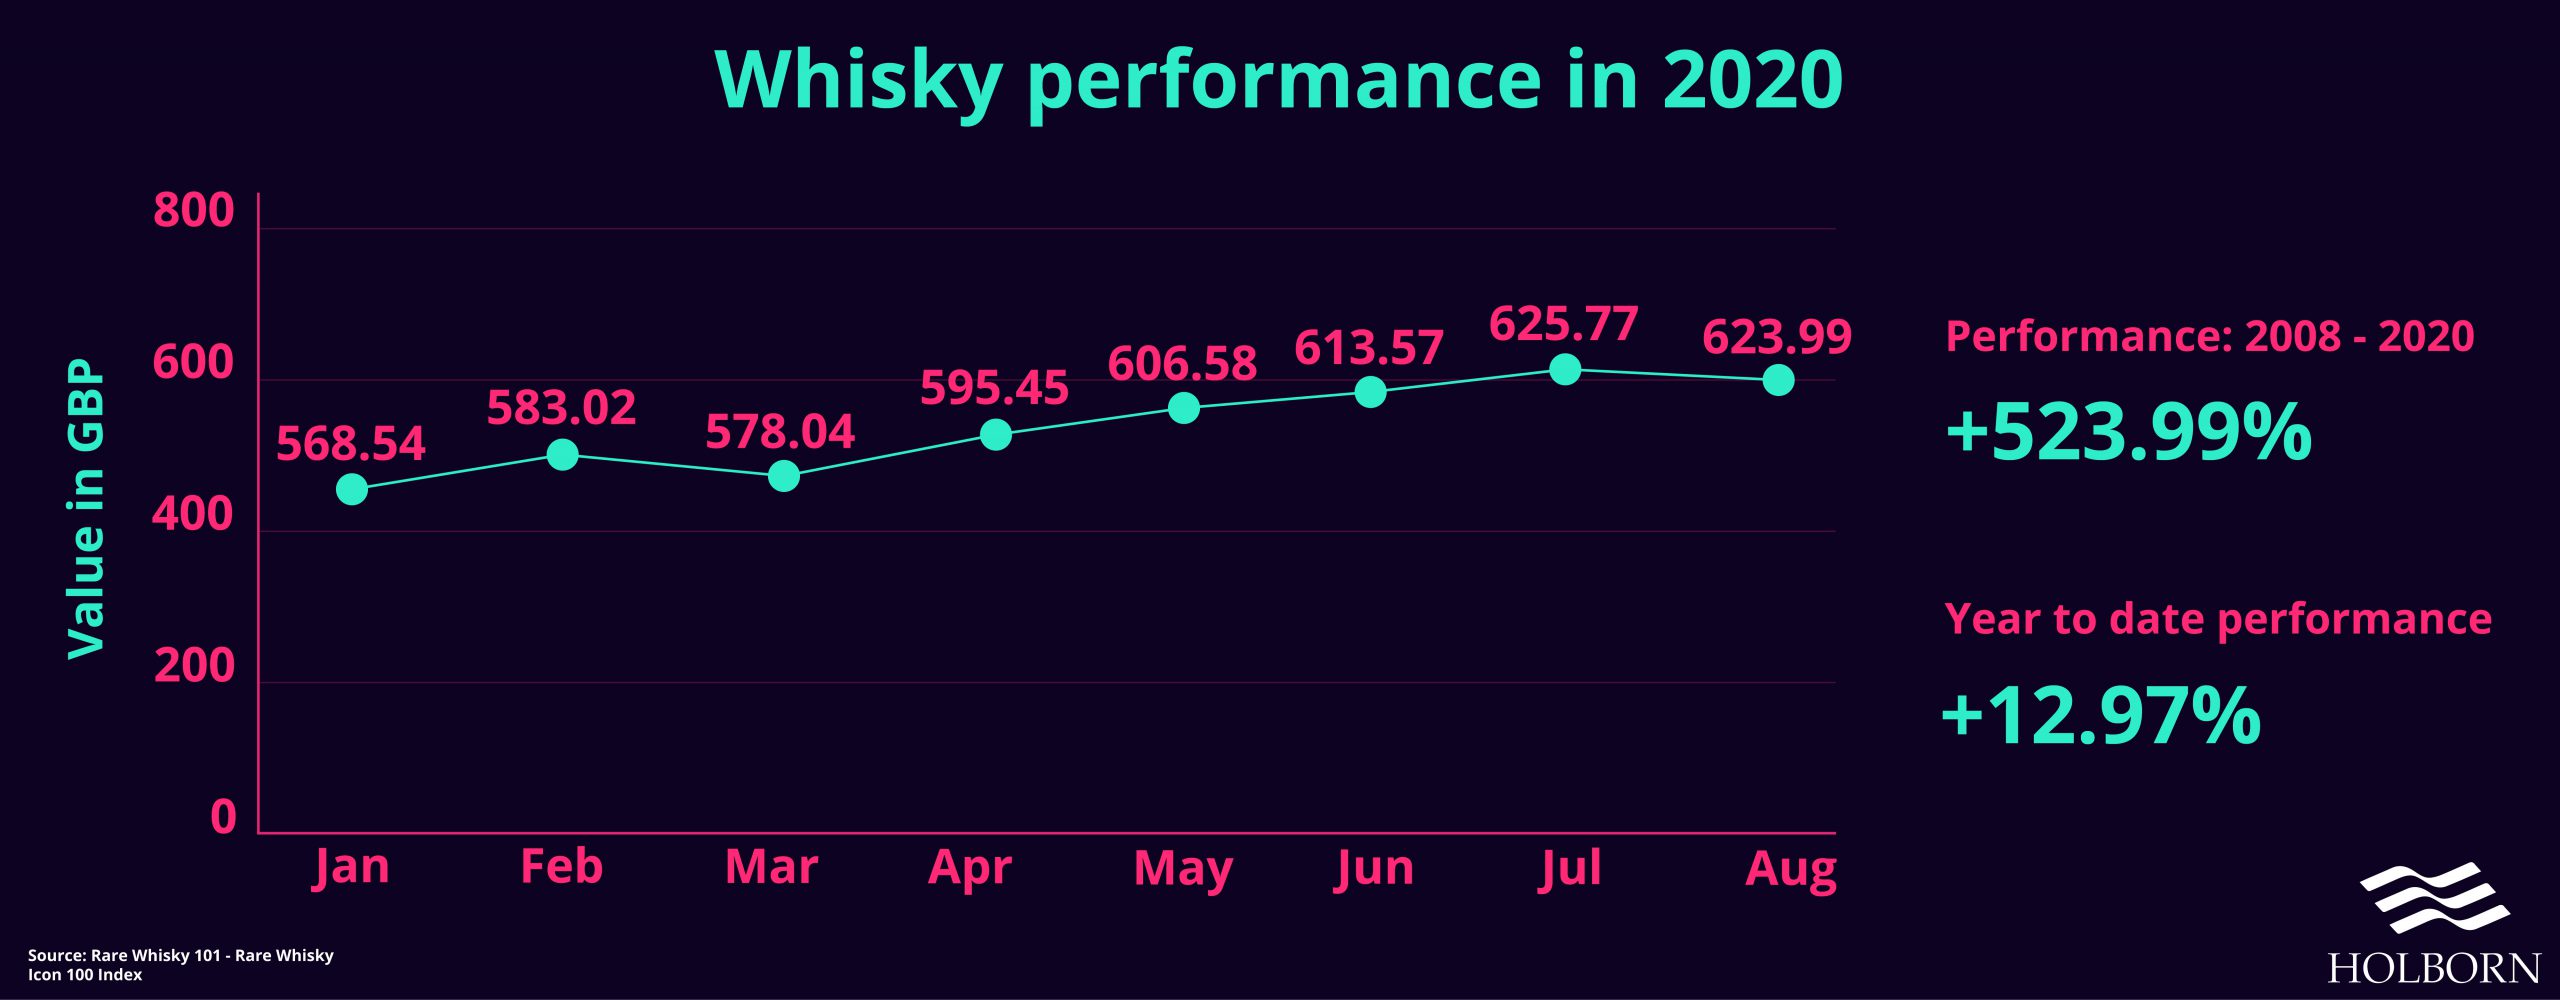 Whisky performance in 2020